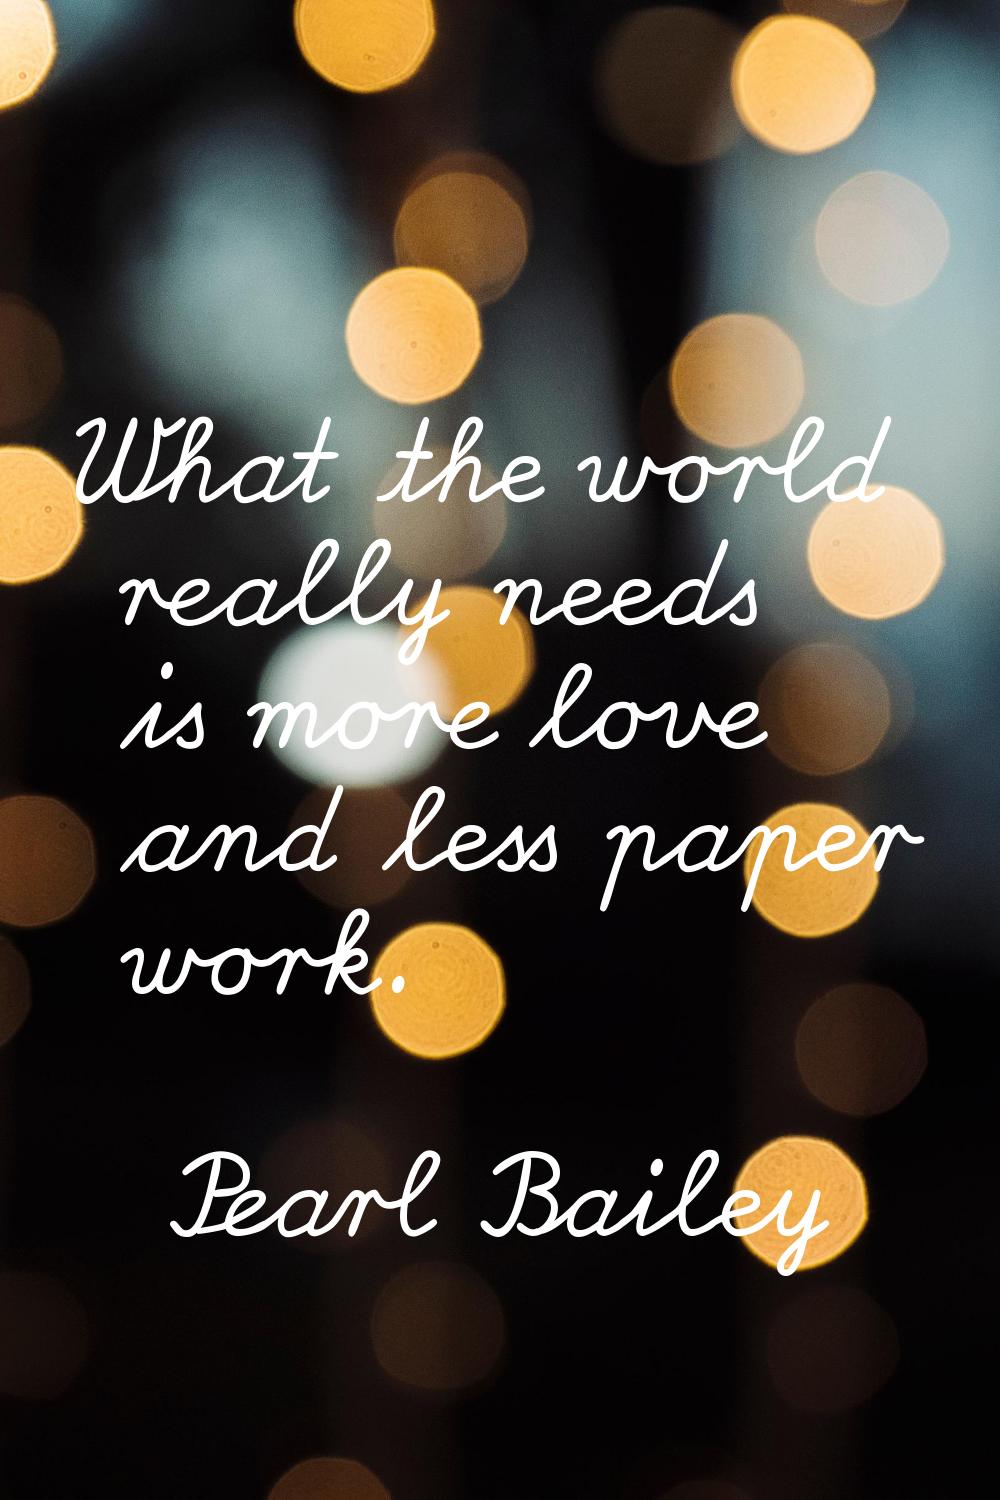 What the world really needs is more love and less paper work.